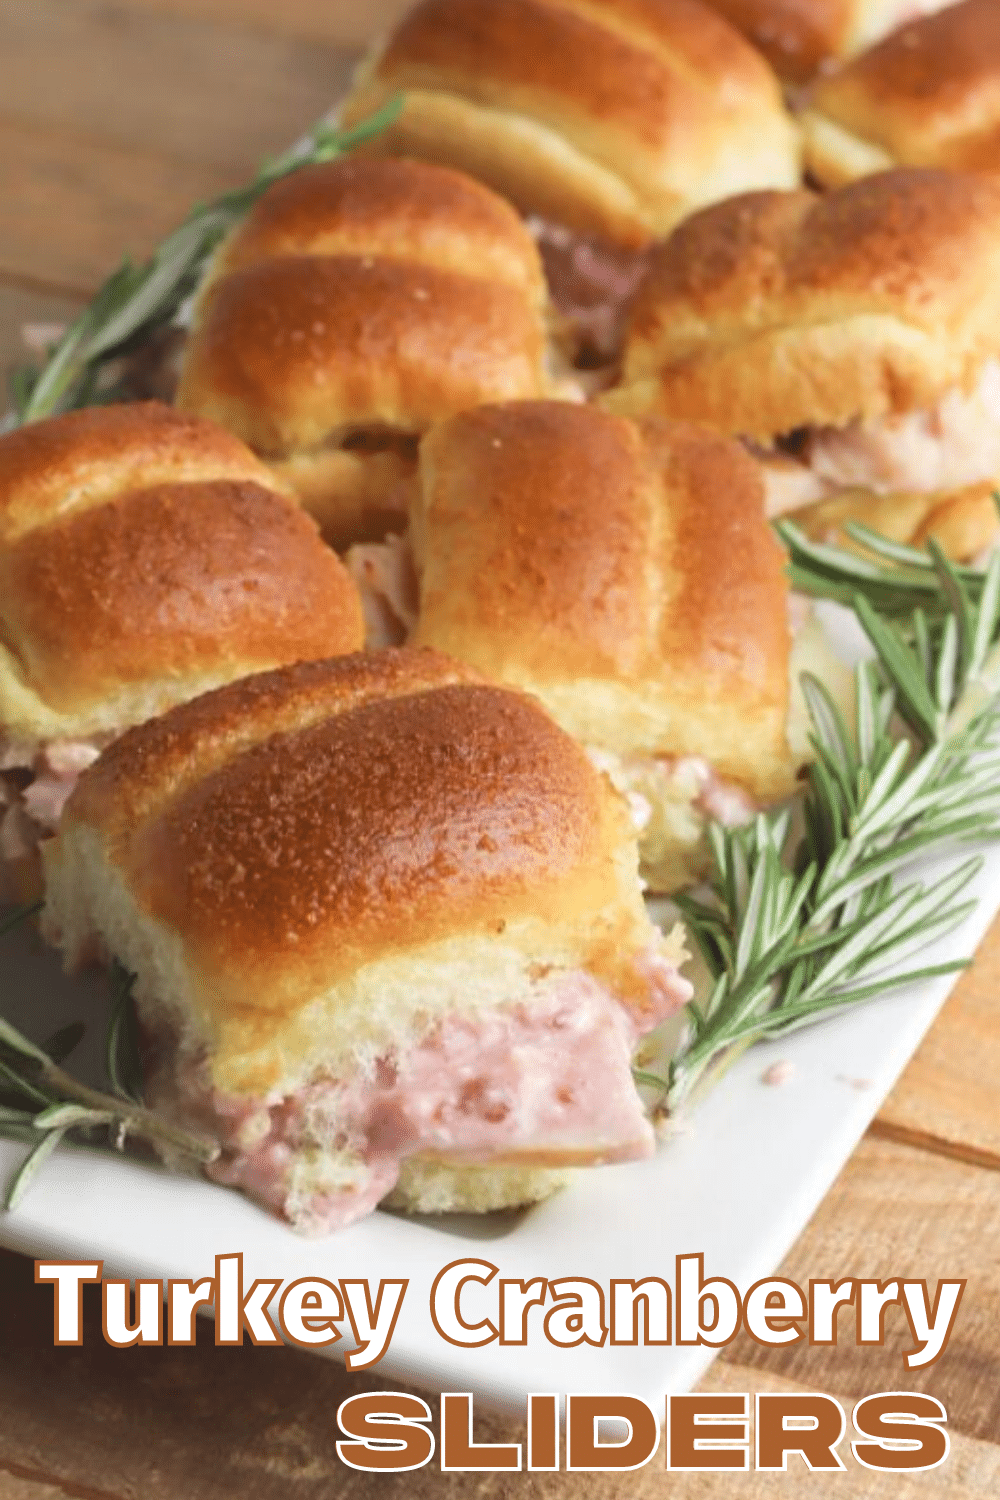 Turkey Cranberry Sliders are the perfect recipe for using up leftover turkey from Thanksgiving and Christmas dinner. This easy slider recipe is delicious! #leftoverturkey #sliders #cranberry via @wondermomwannab